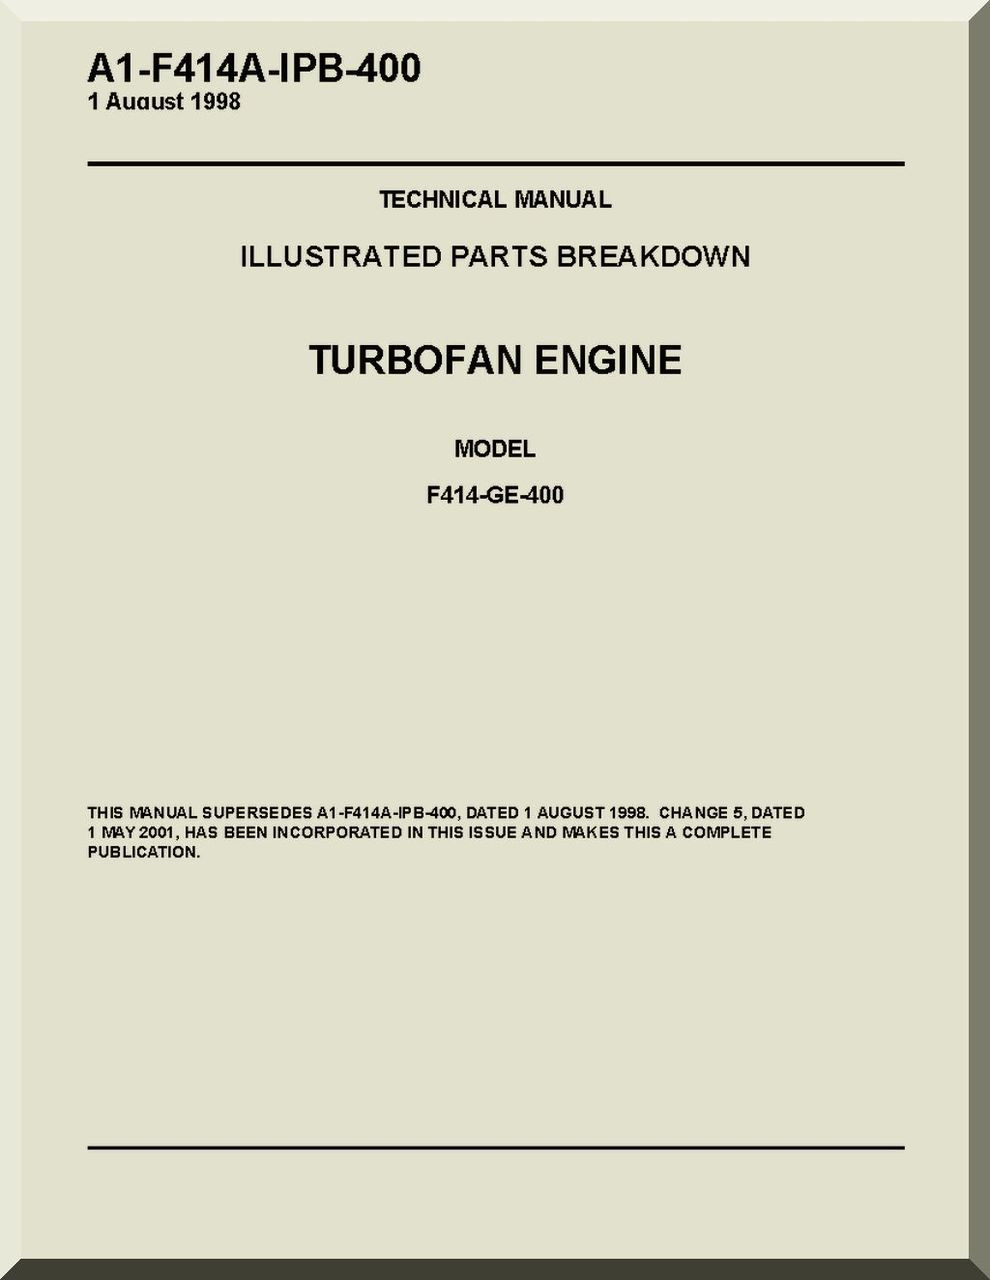 General Electric F414-GE-400 Aircraft Turbofan Engine Illustrated Parts